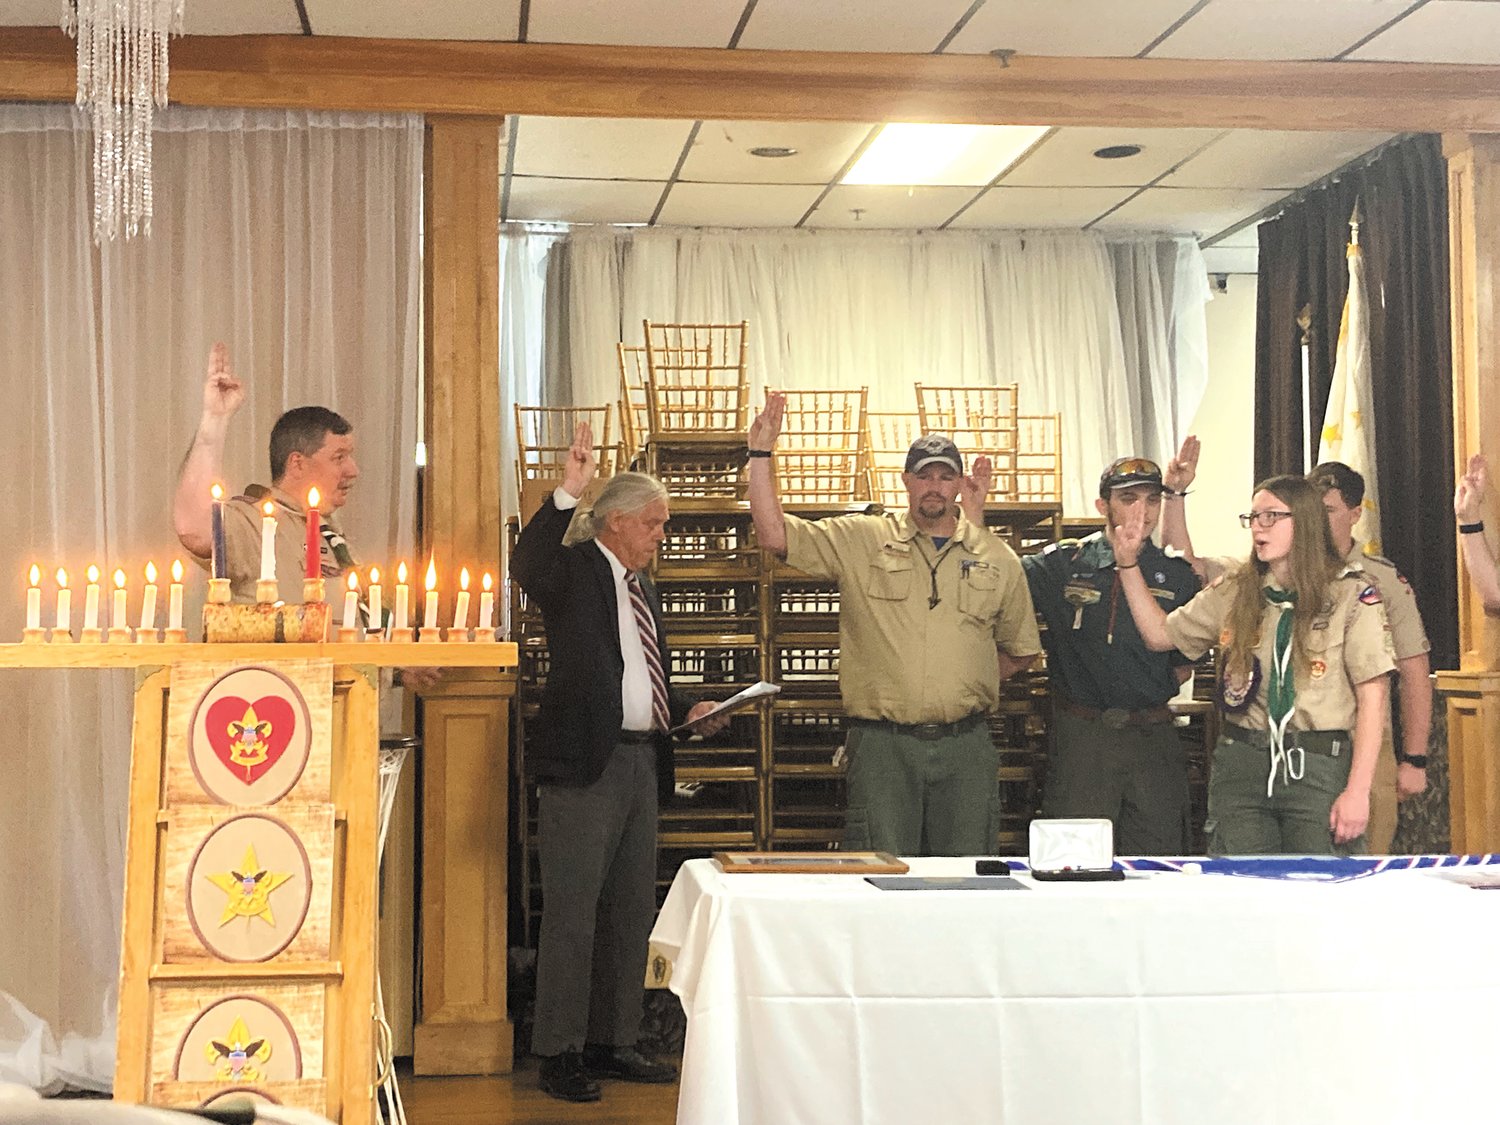 LEADING THE SCOUT OATH: Morgan Bitgood led members of Troop 13 and Troop 22 in the scout oath at her Eagle Scout ceremony on June 5.